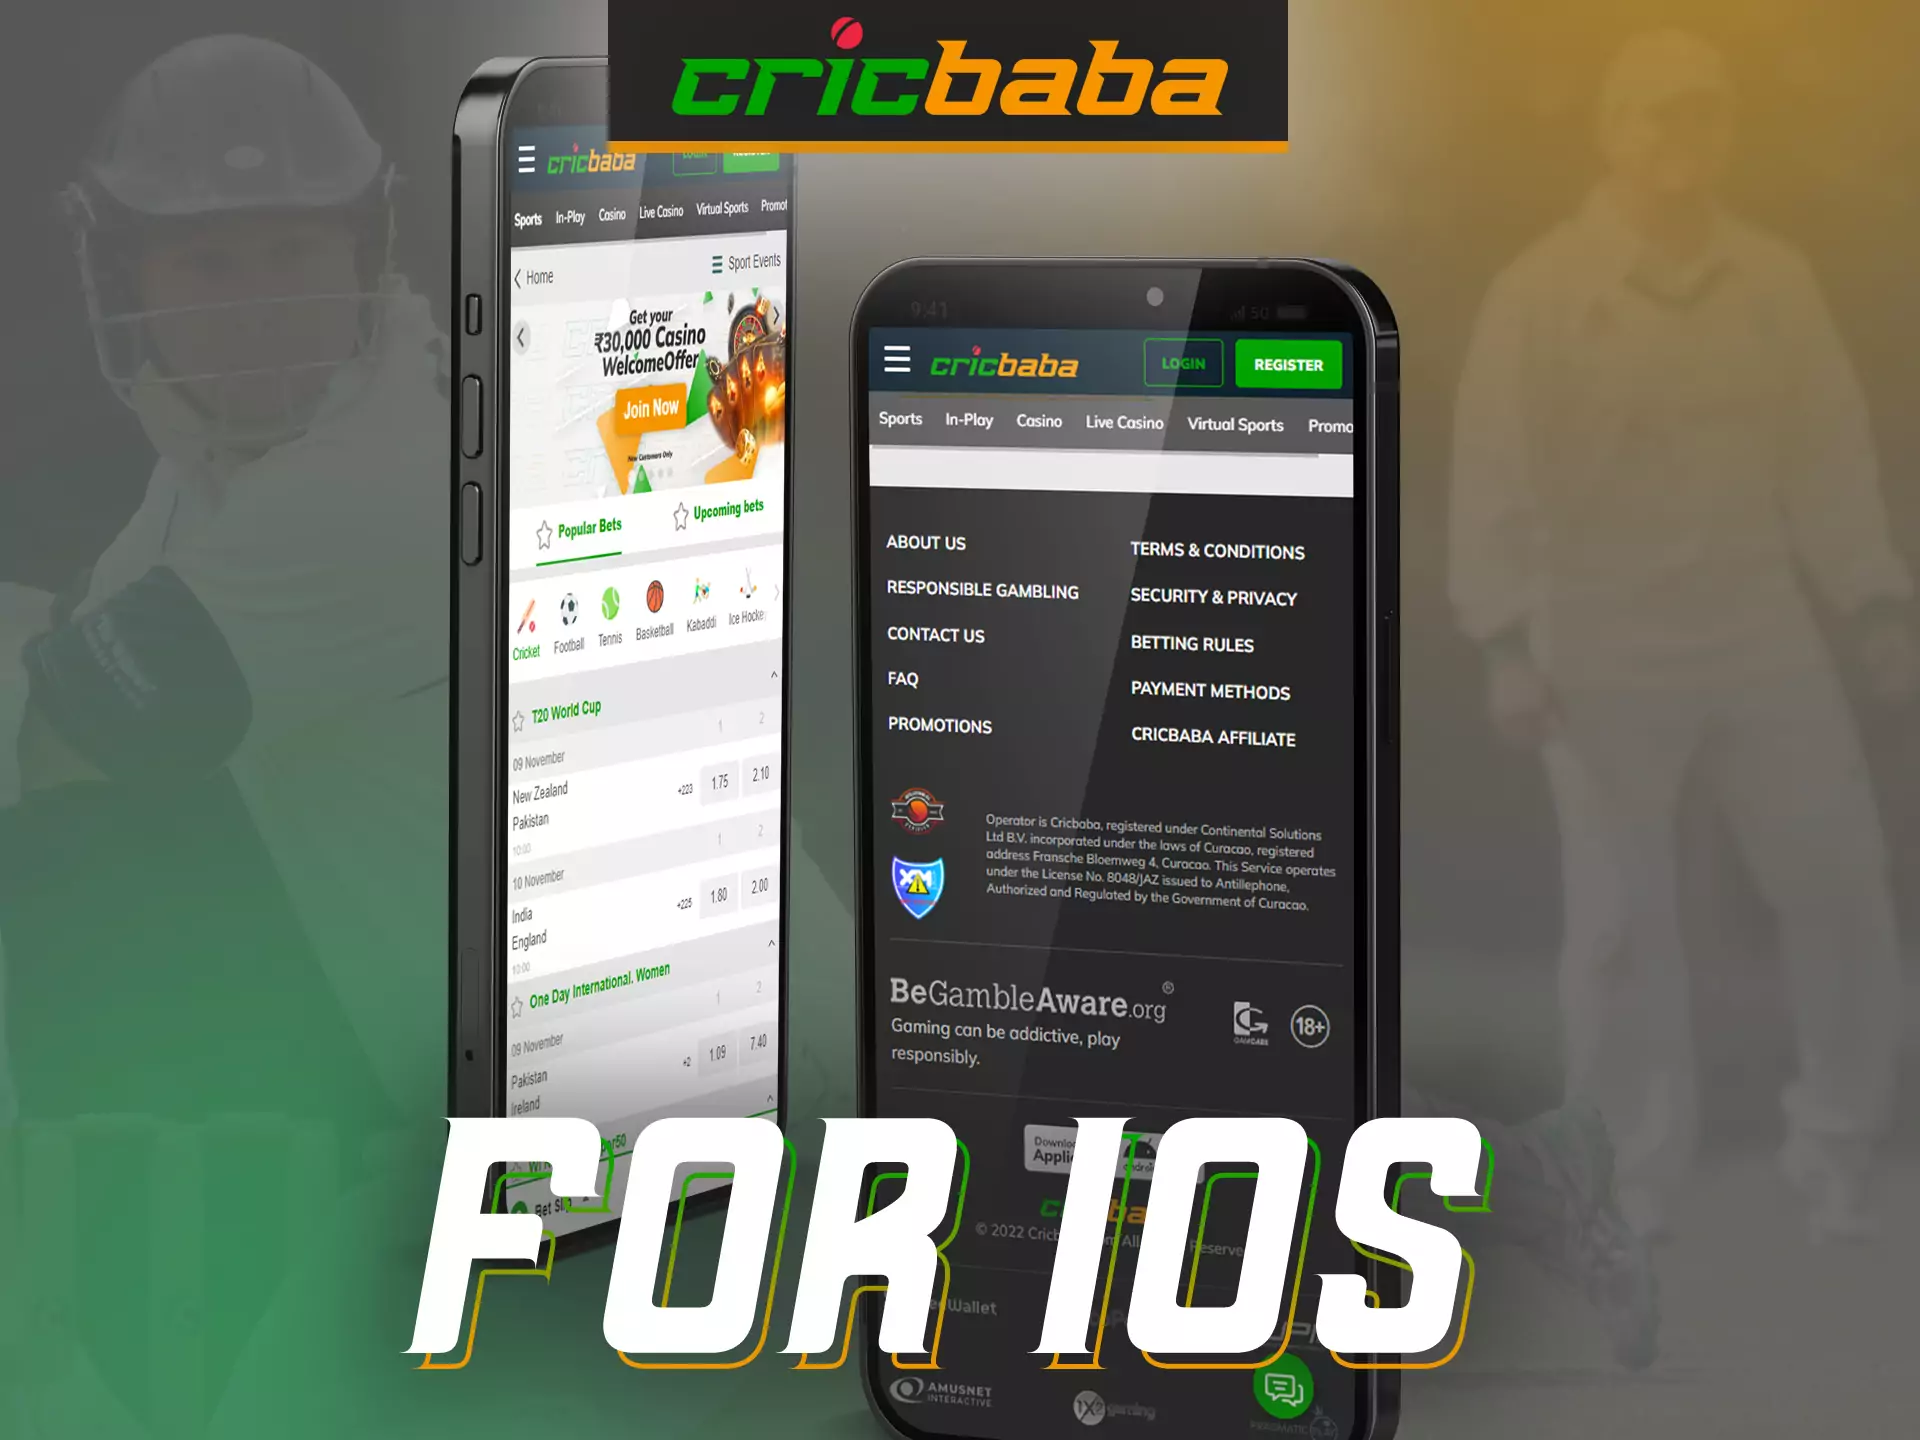 Use Cricbaba on your favorite iOS device.